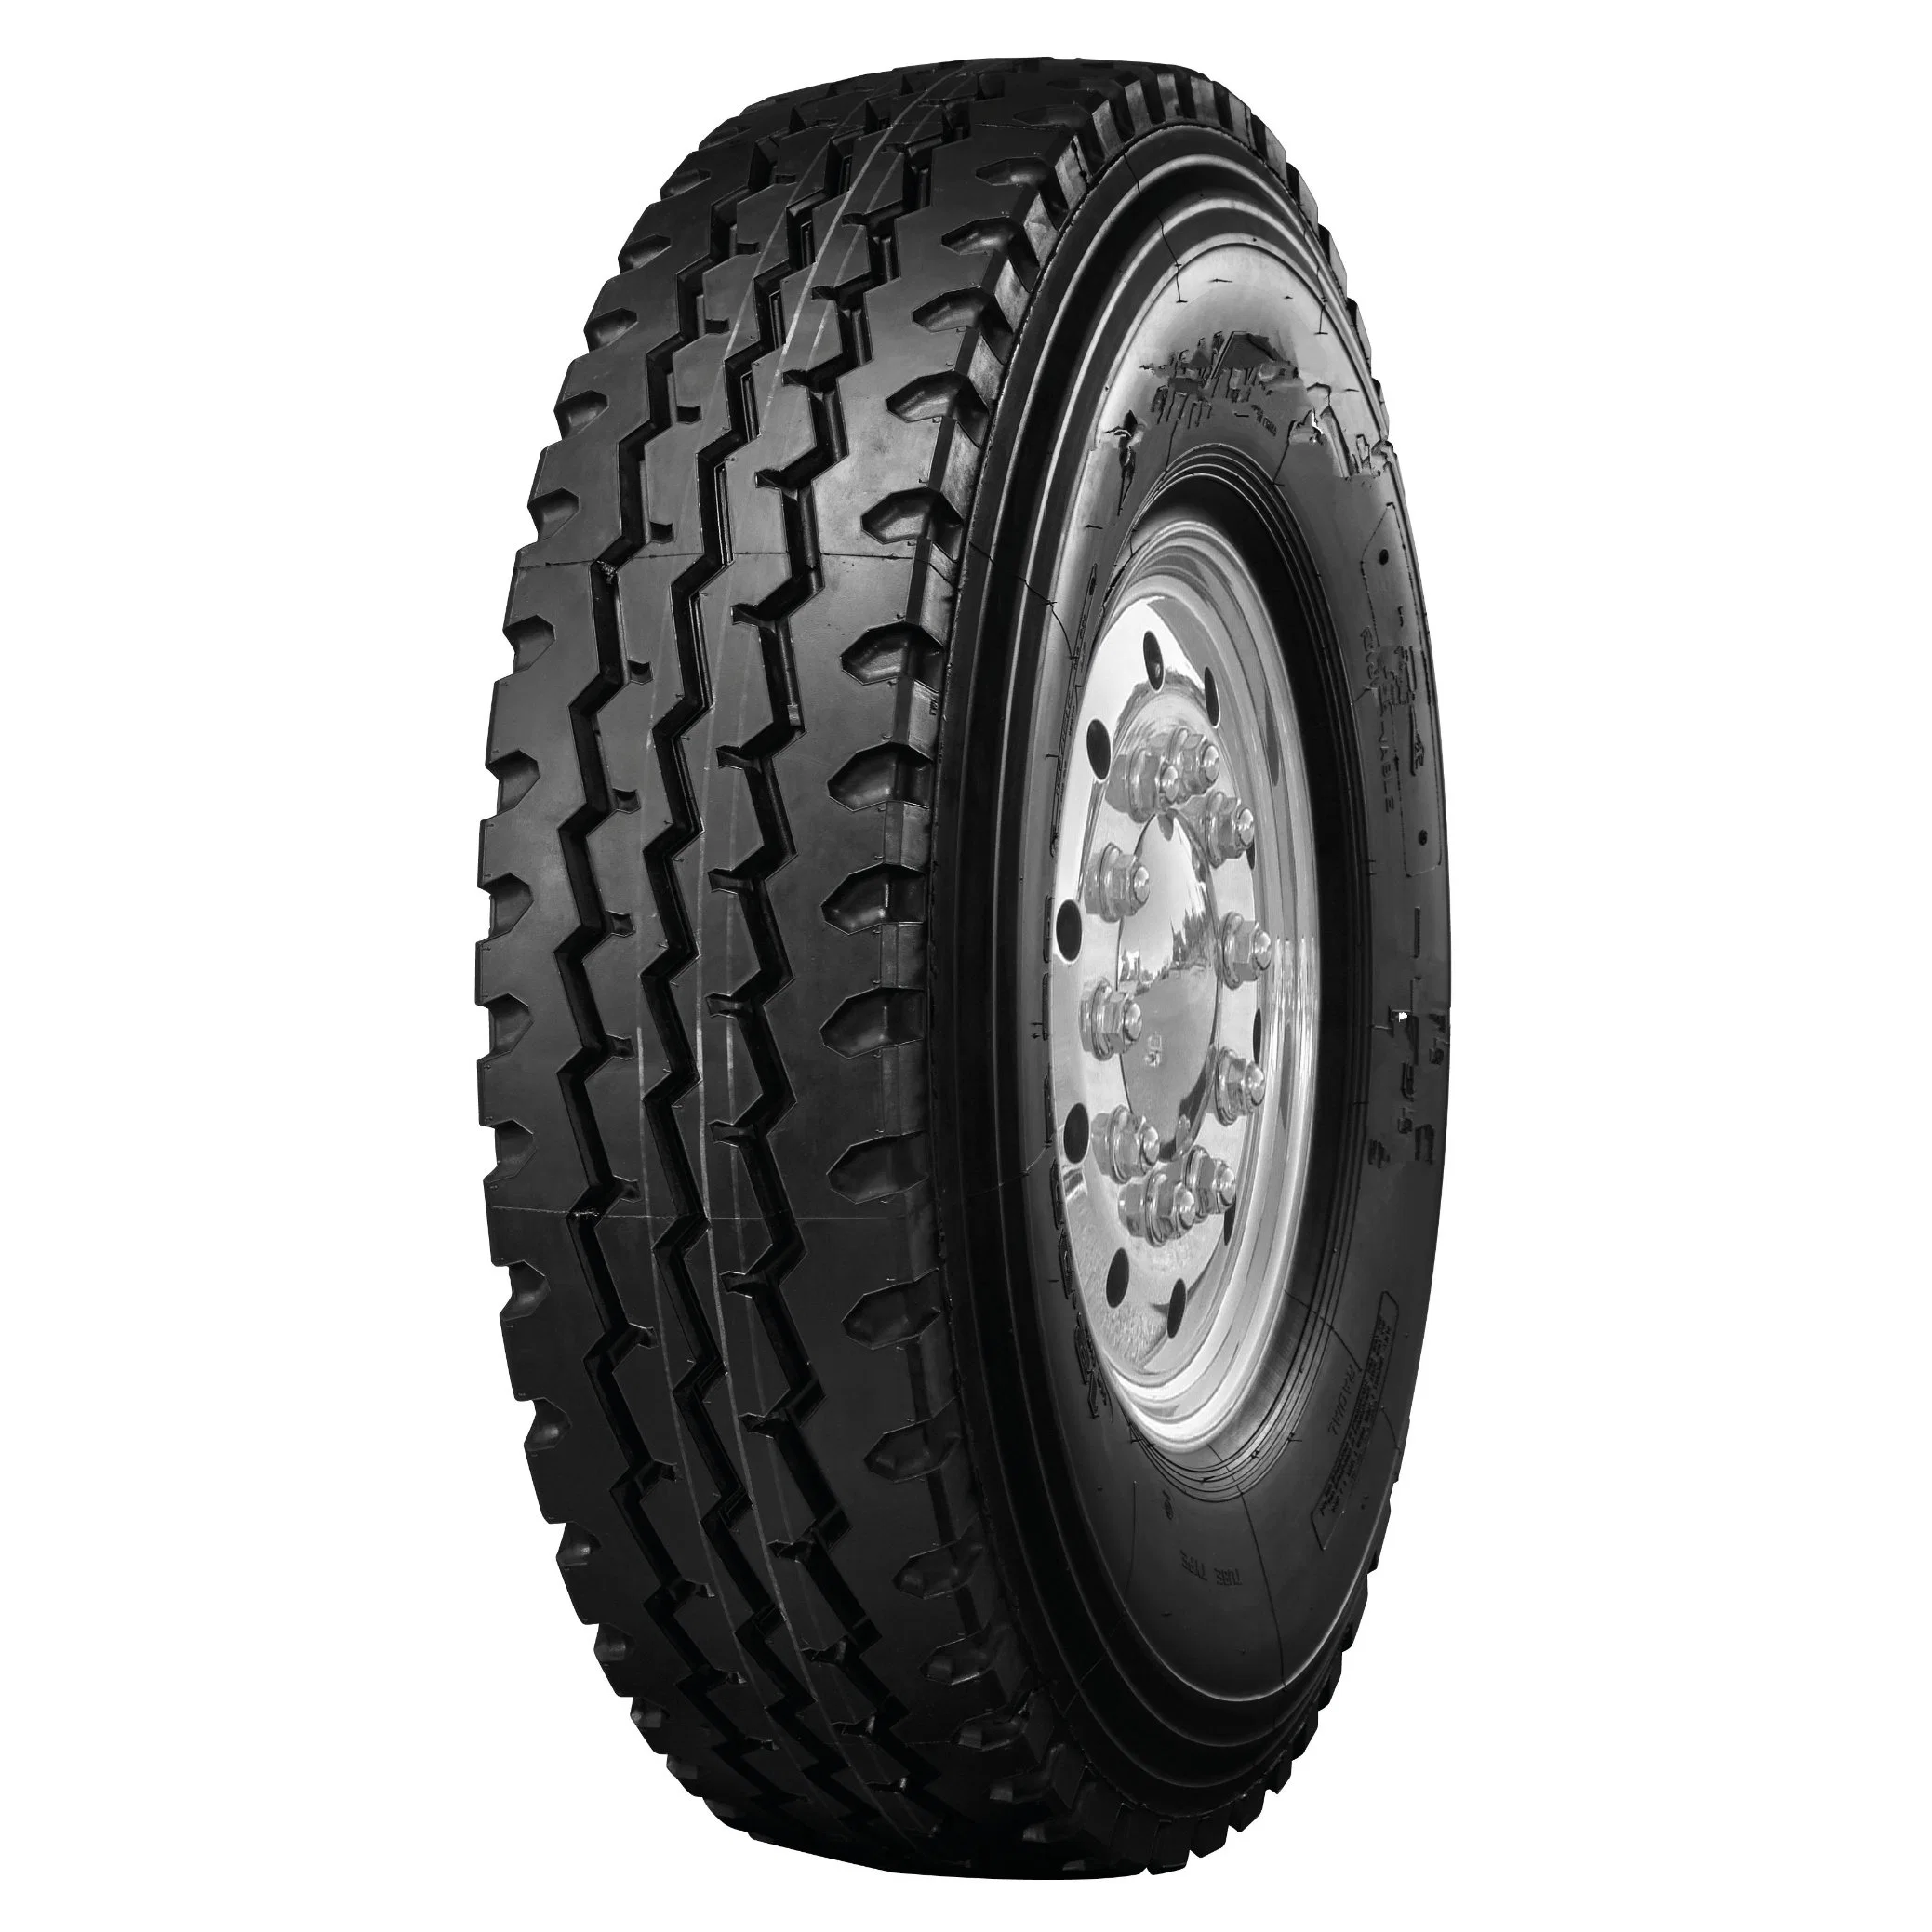 Heavy Load All Steel Radial Truck OTR Tyres off The Road Use Tire Wheel and Rim Tyre for Semi Trailer